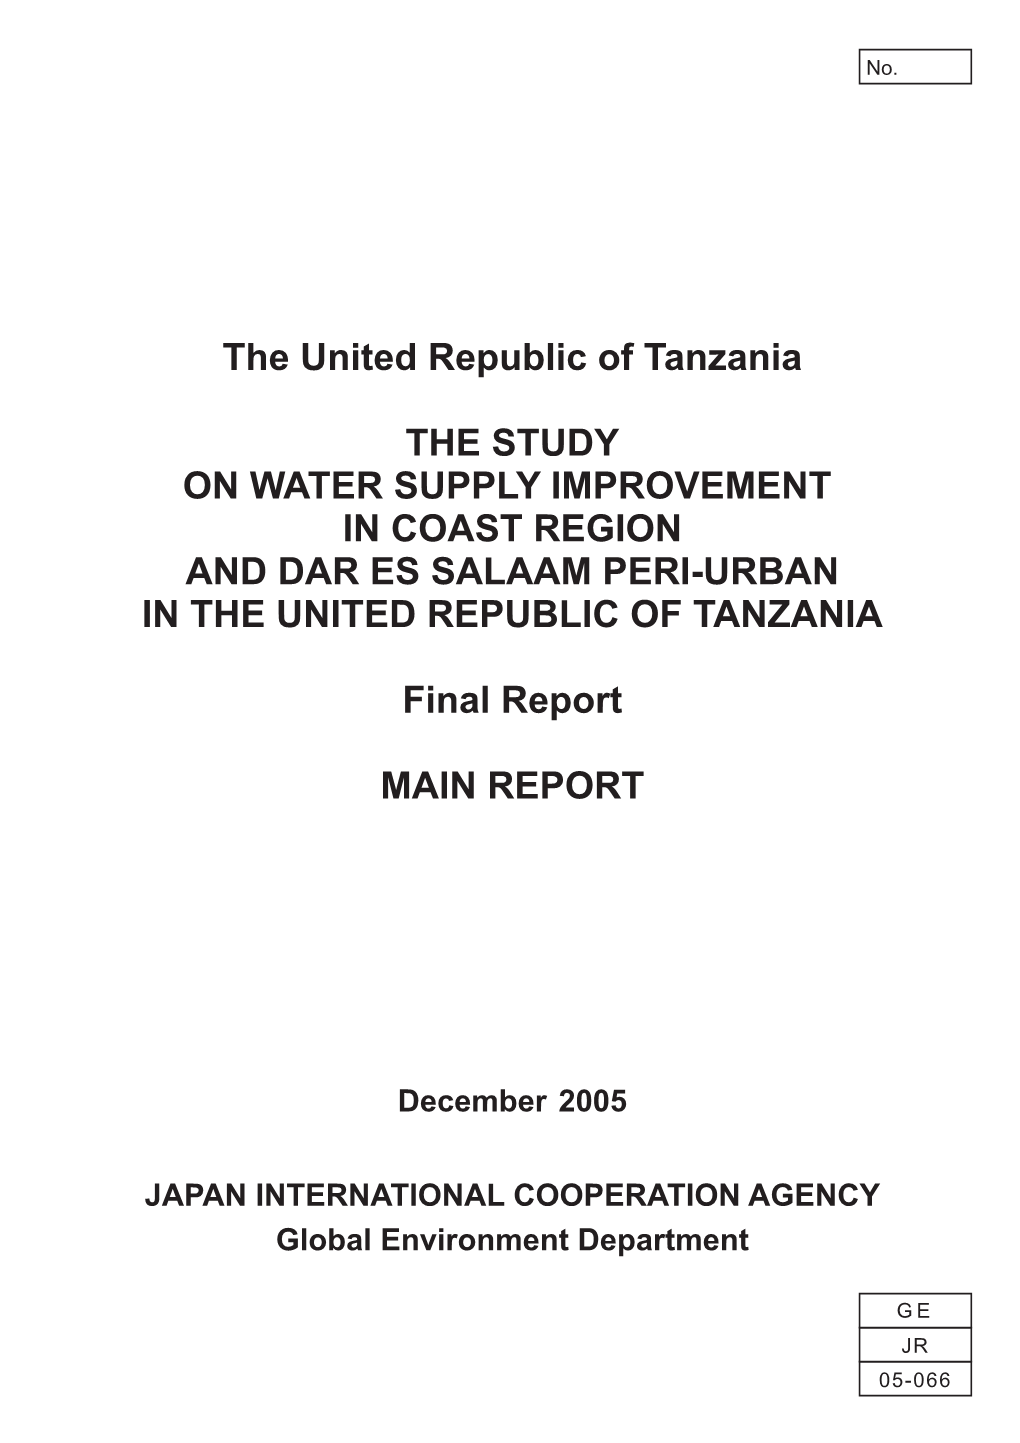 The United Republic of Tanzania the STUDY on WATER SUPPLY